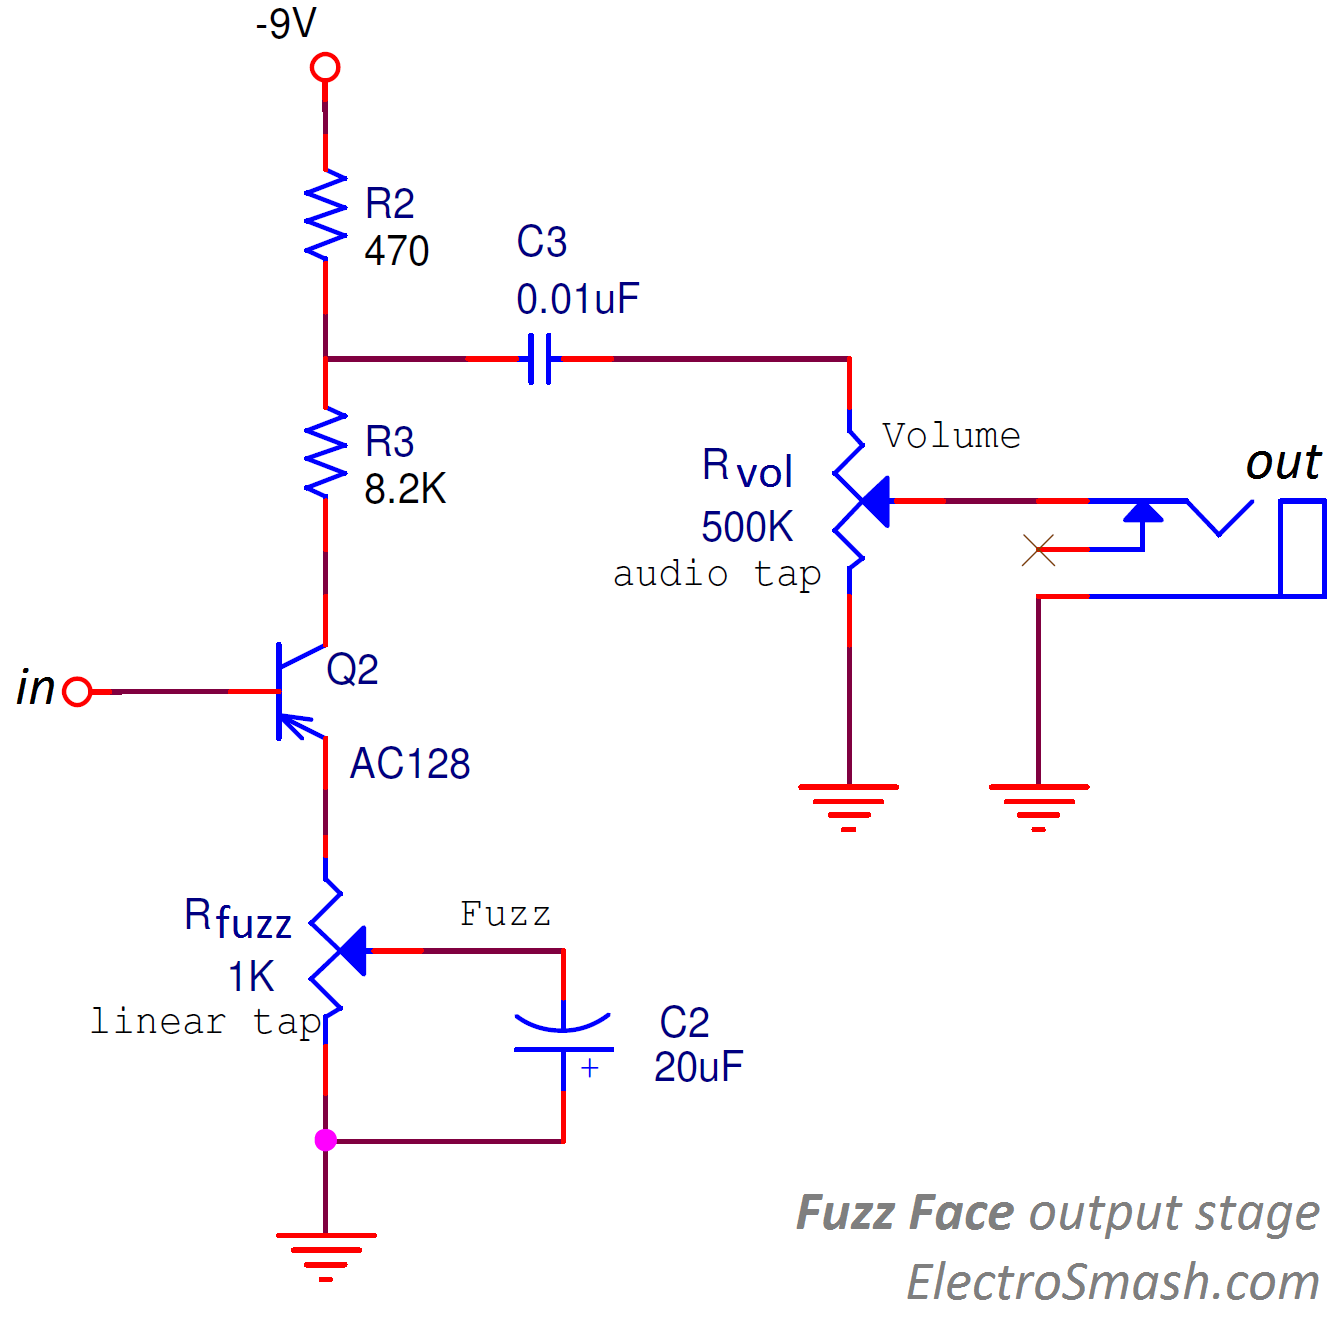 fuzz face output stage